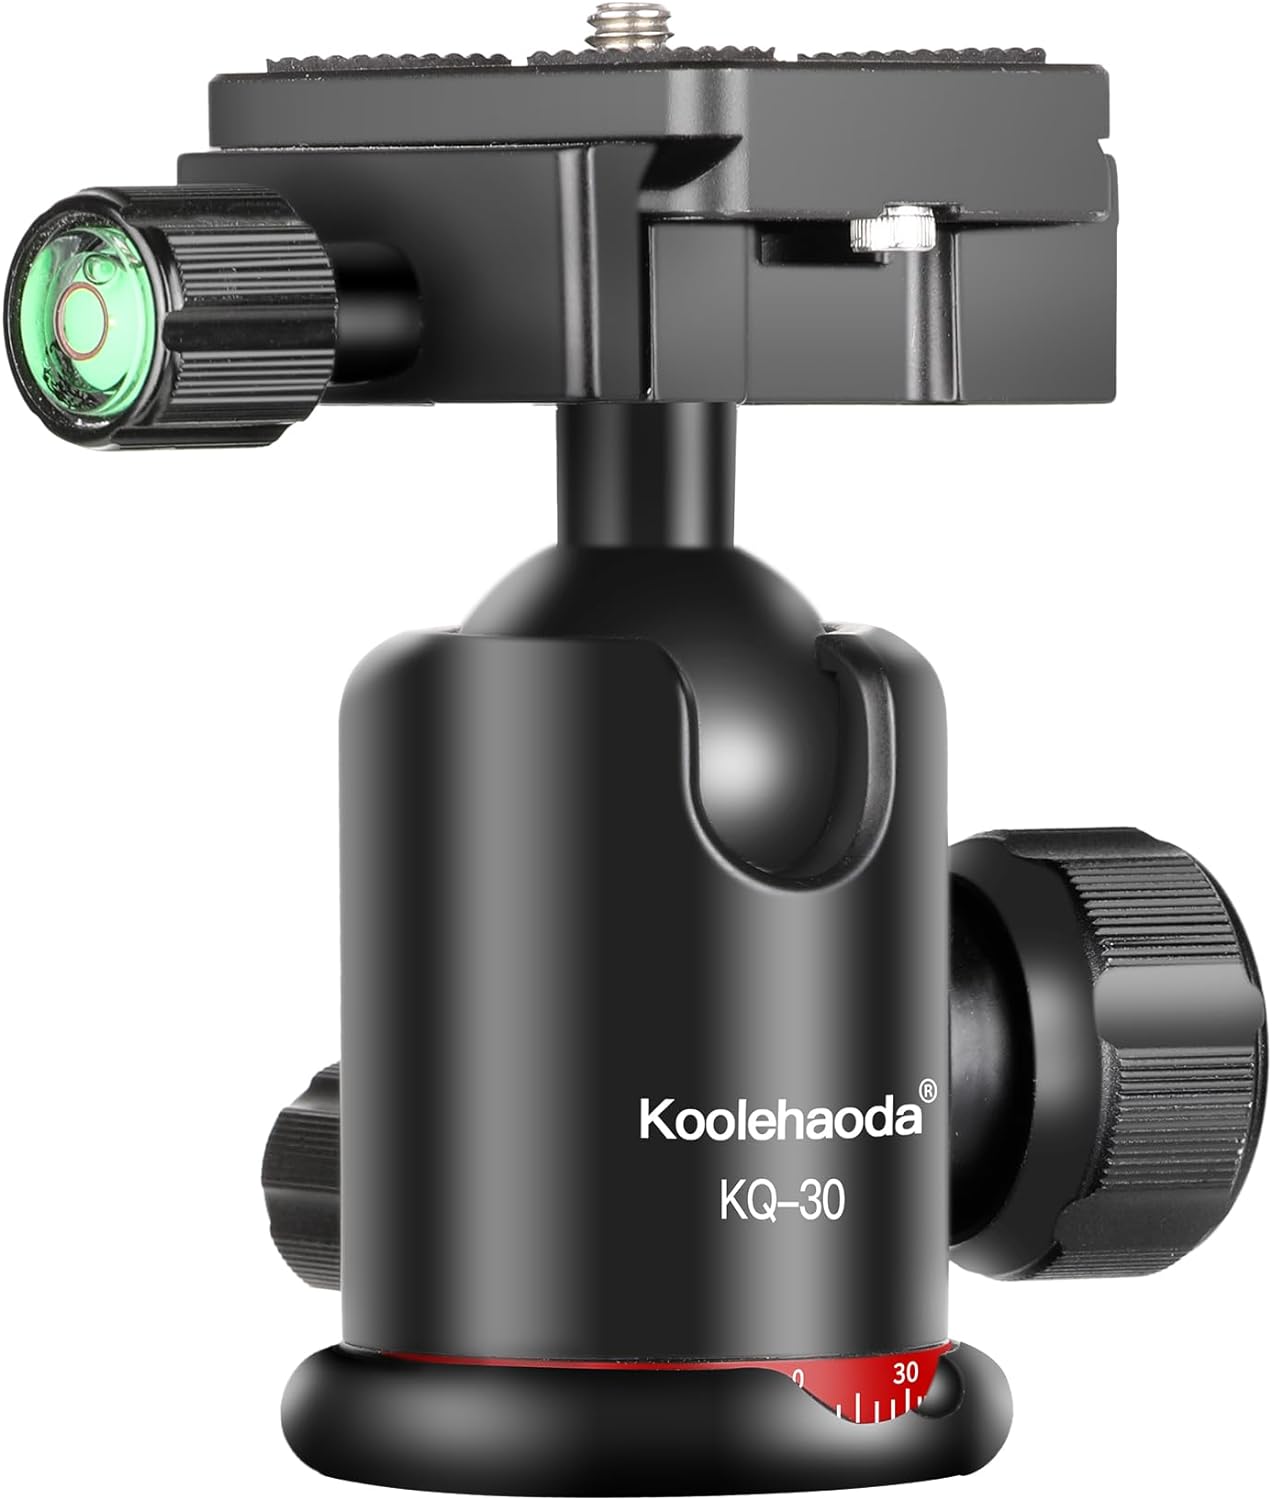 Koolehaoda Tripod Ball Head 360 Degree Rotating Panoramic Ballhead with 1/4 inch Quick Release Plate Bubble Level for Tripod, Monopod, Slider, Camera, Load up to 17.6lbs/8kg